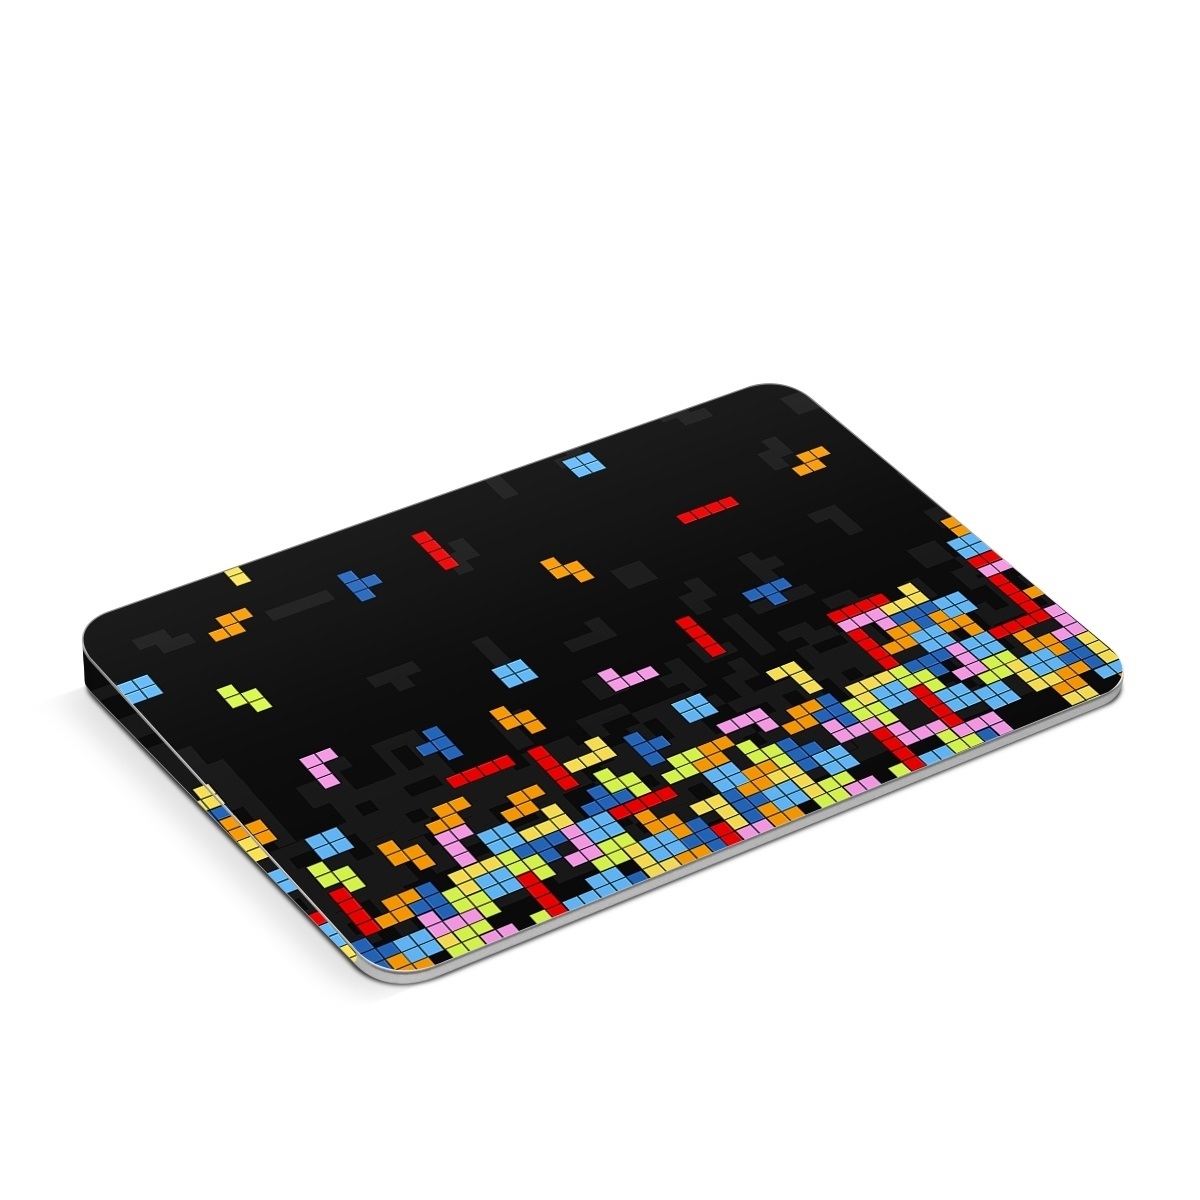 Apple Magic Trackpad Skin design of Pattern, Symmetry, Font, Design, Graphic design, Line, Colorfulness, Magenta, Square, Graphics, with black, green, blue, orange, red colors